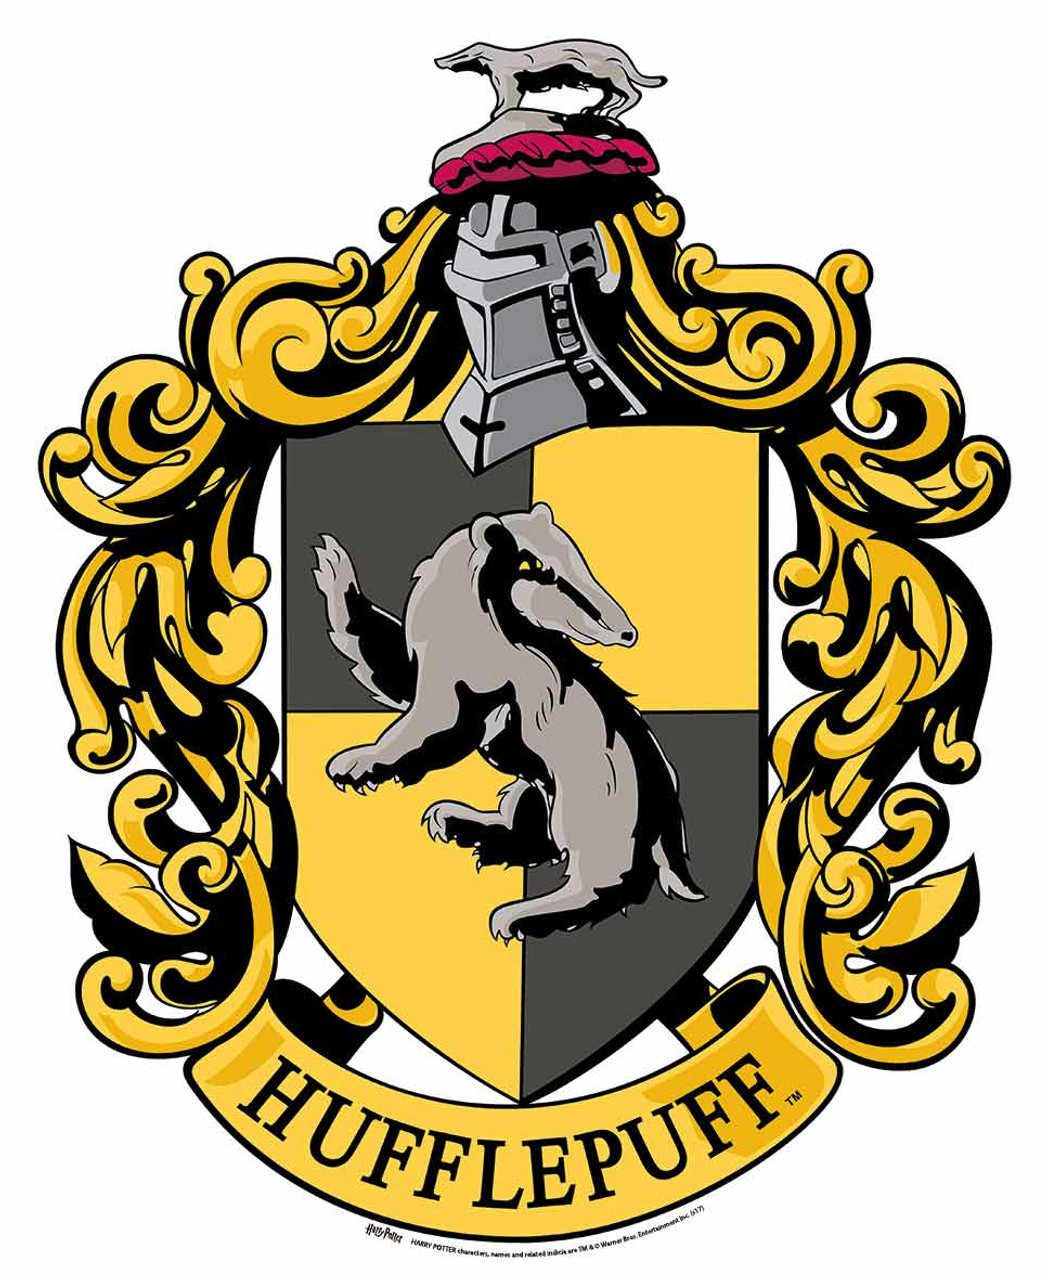 hufflepuff crest from harry potter wall mounted official cardboard cutout